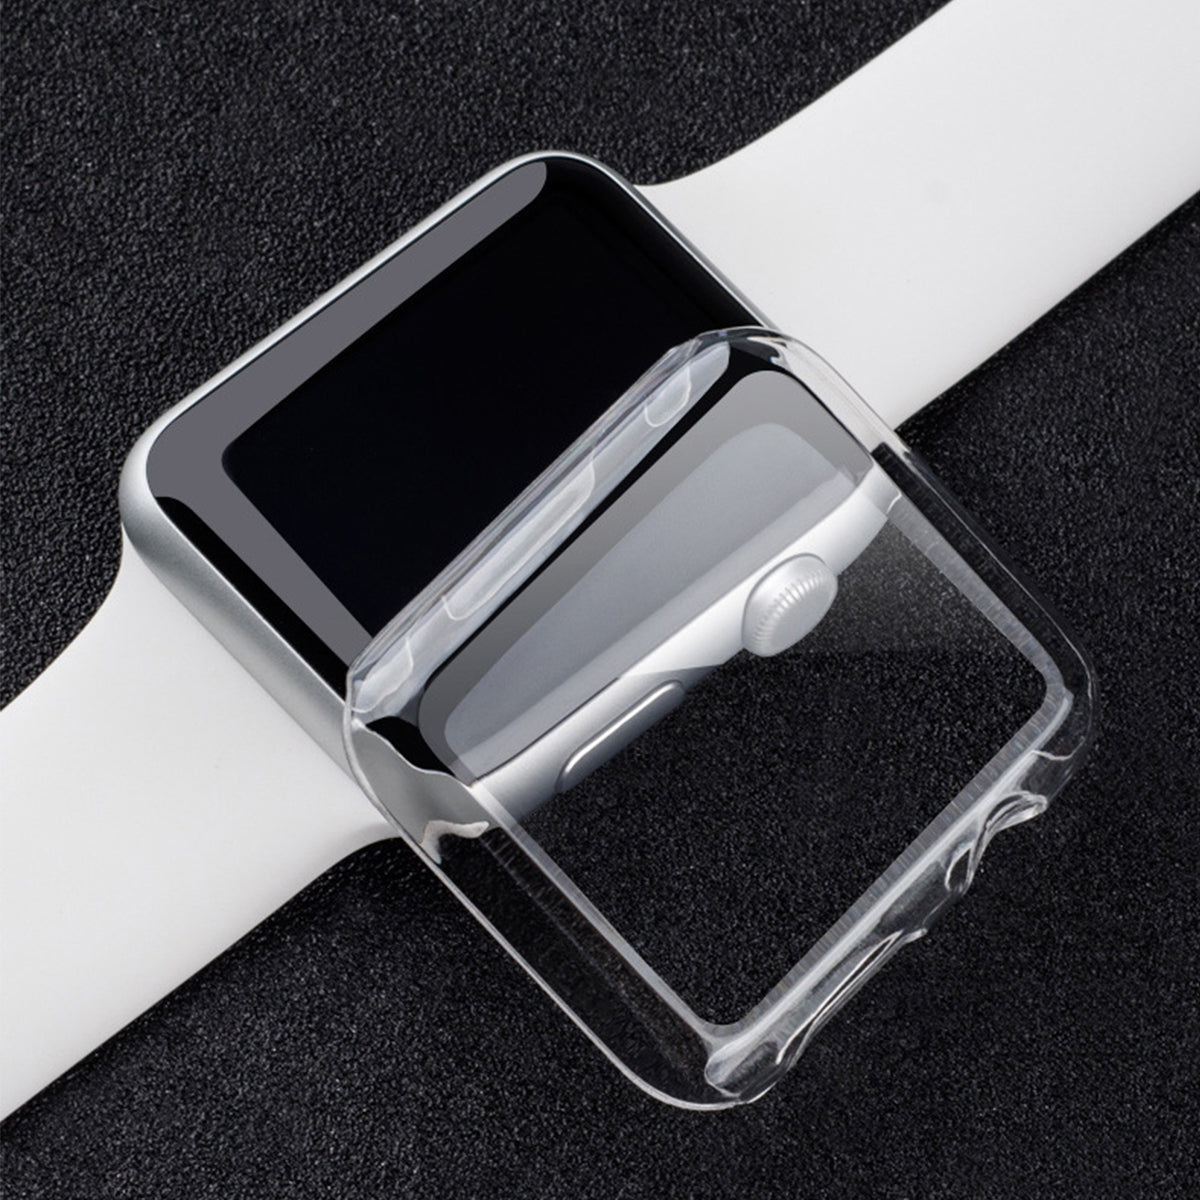 38/42mm Thin Clear Front Case Cover Screen Protector for iWatch Series 3